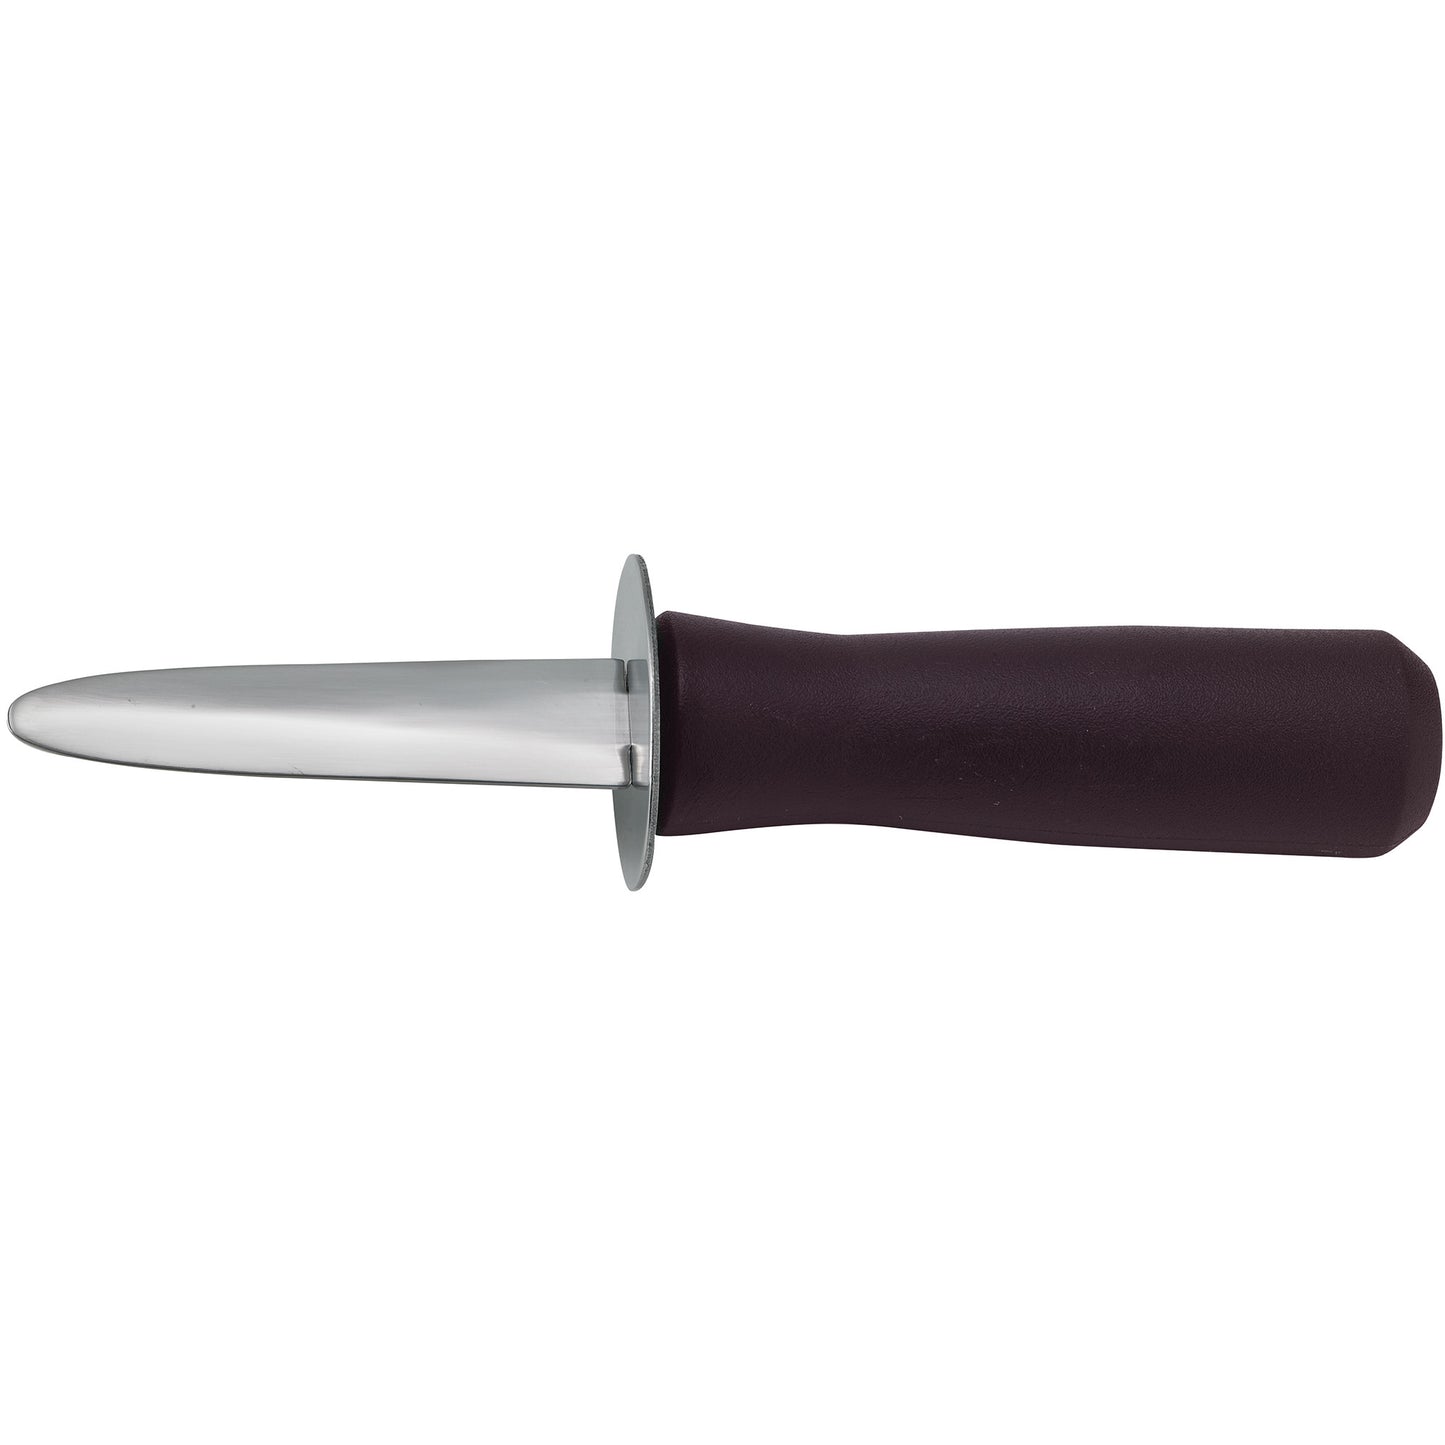 KCL-5P - 3" Blade Oyster/Clam Knife, Plastic Handle